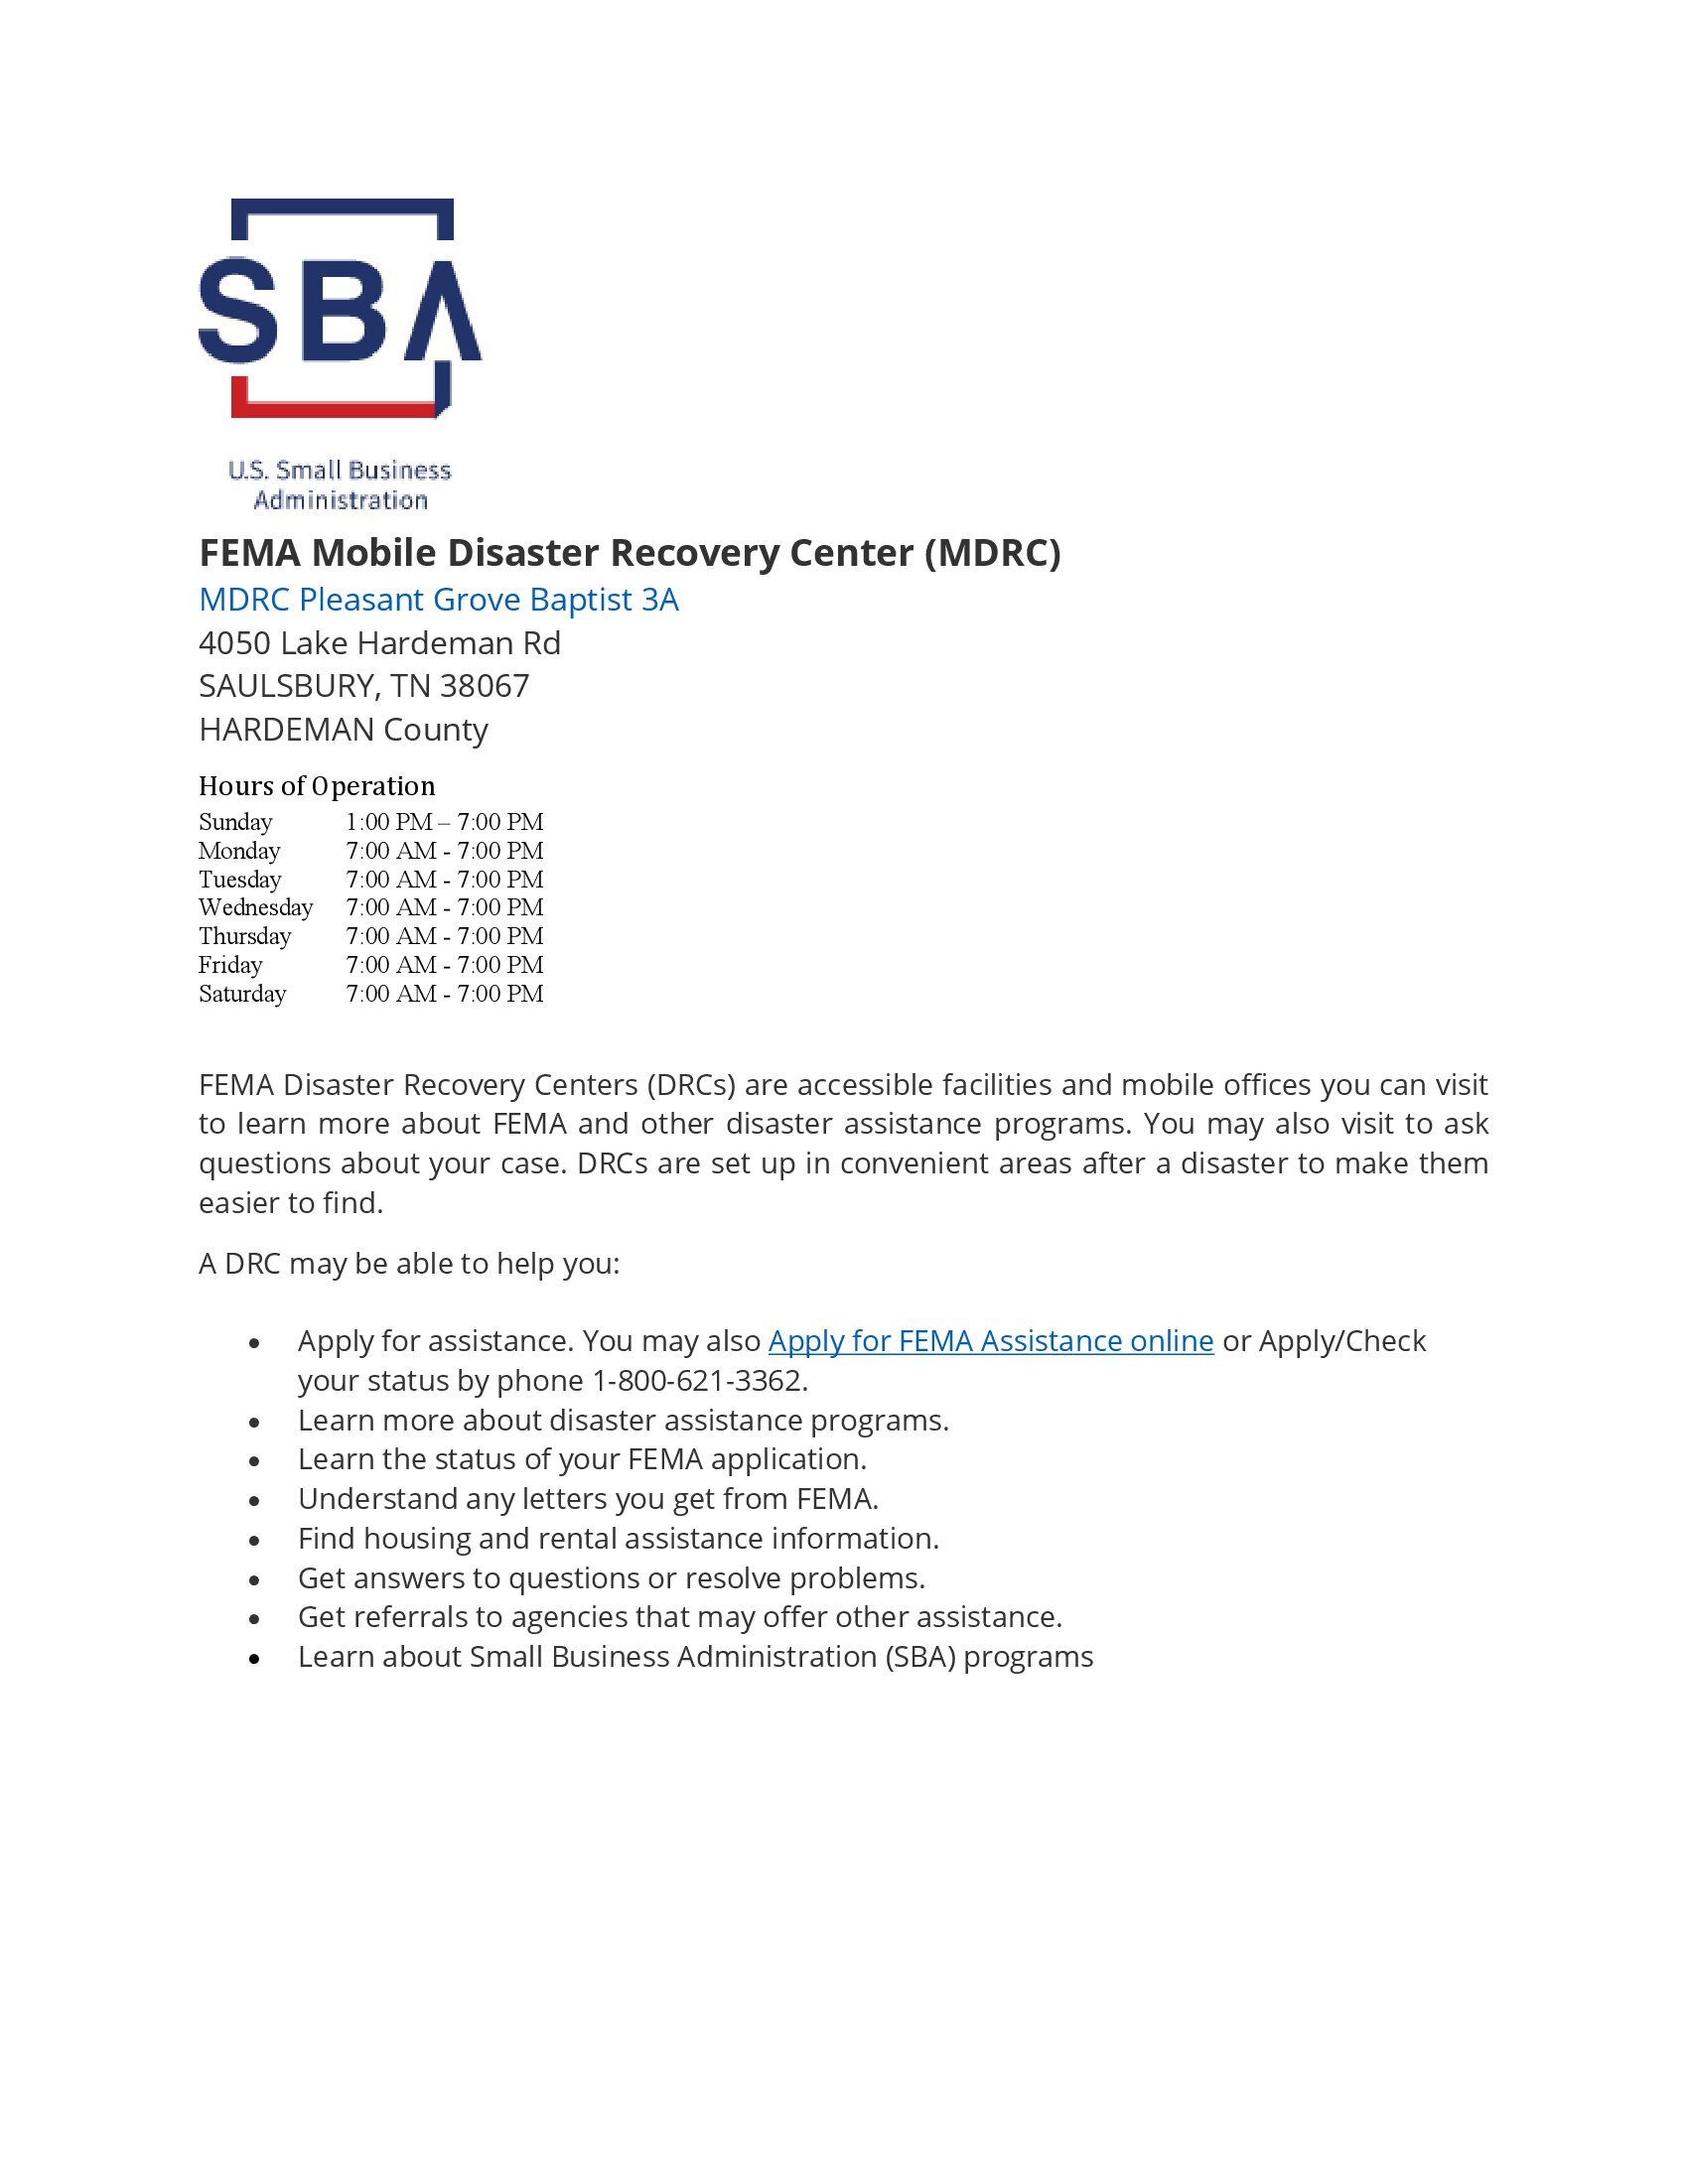 FEMA Mobile Disaster Recovery Center (MDRC)